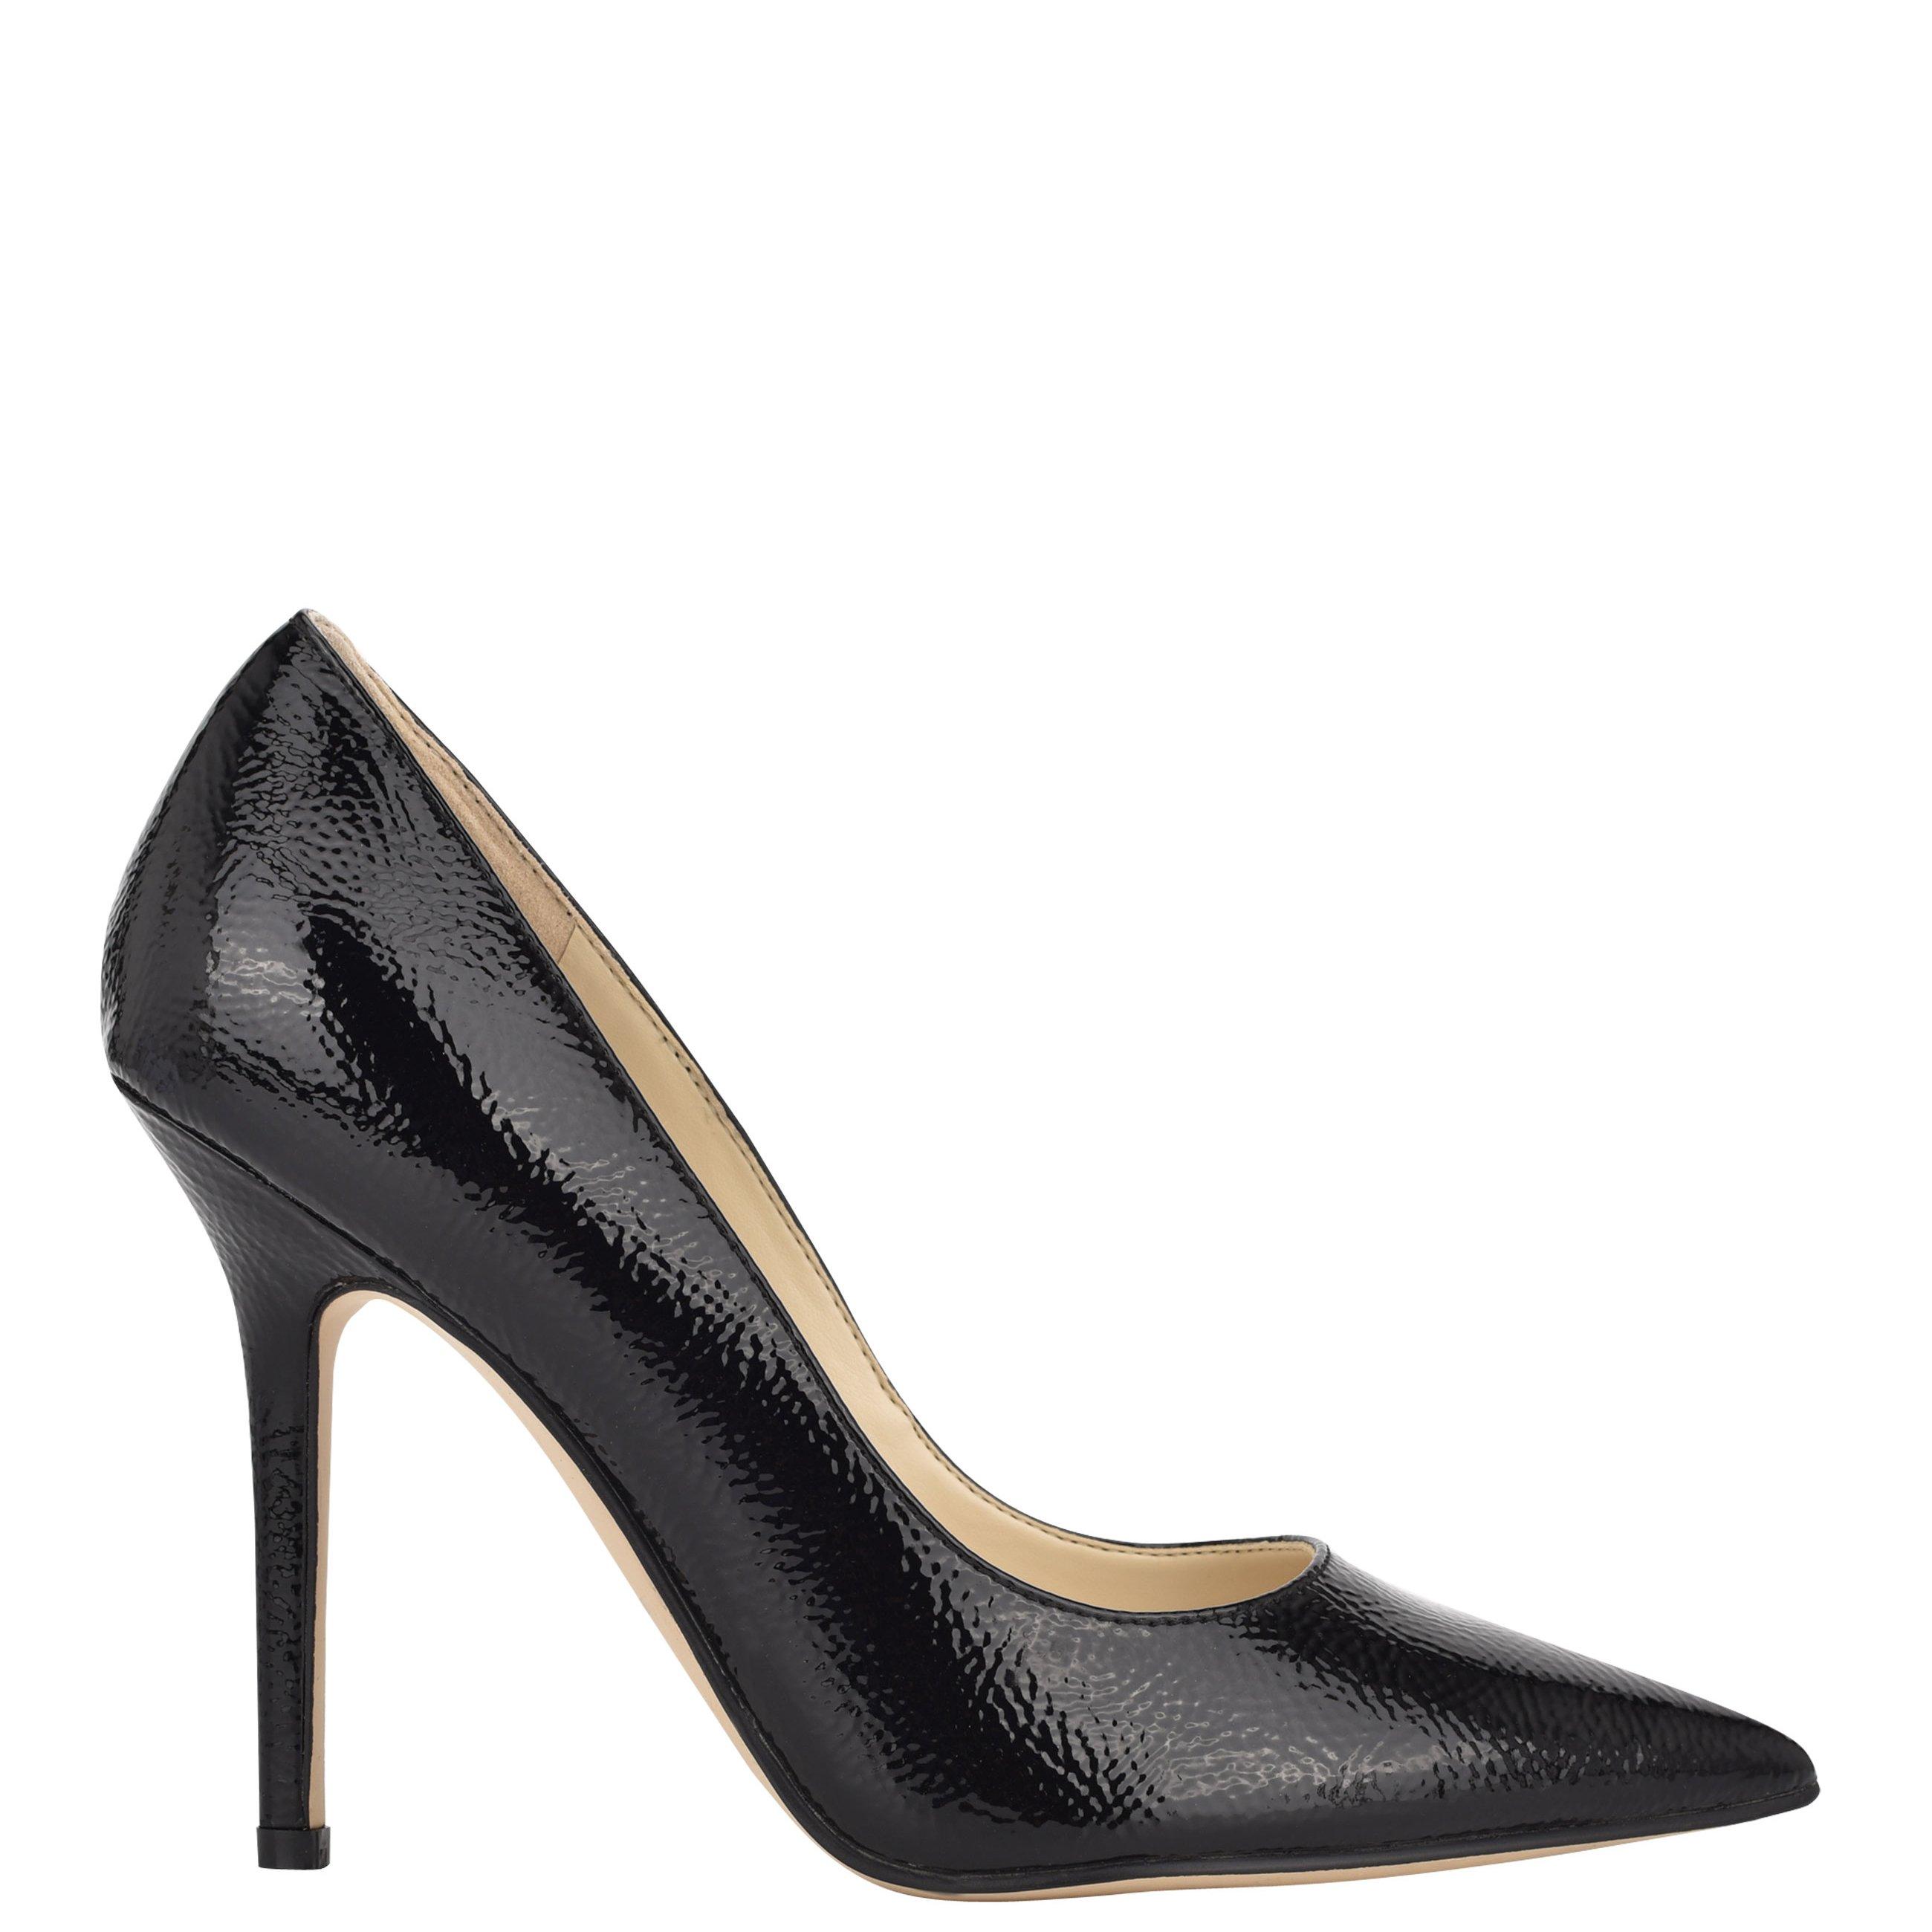 Nine West Bliss Pointy Toe Pumps in Black - Lyst